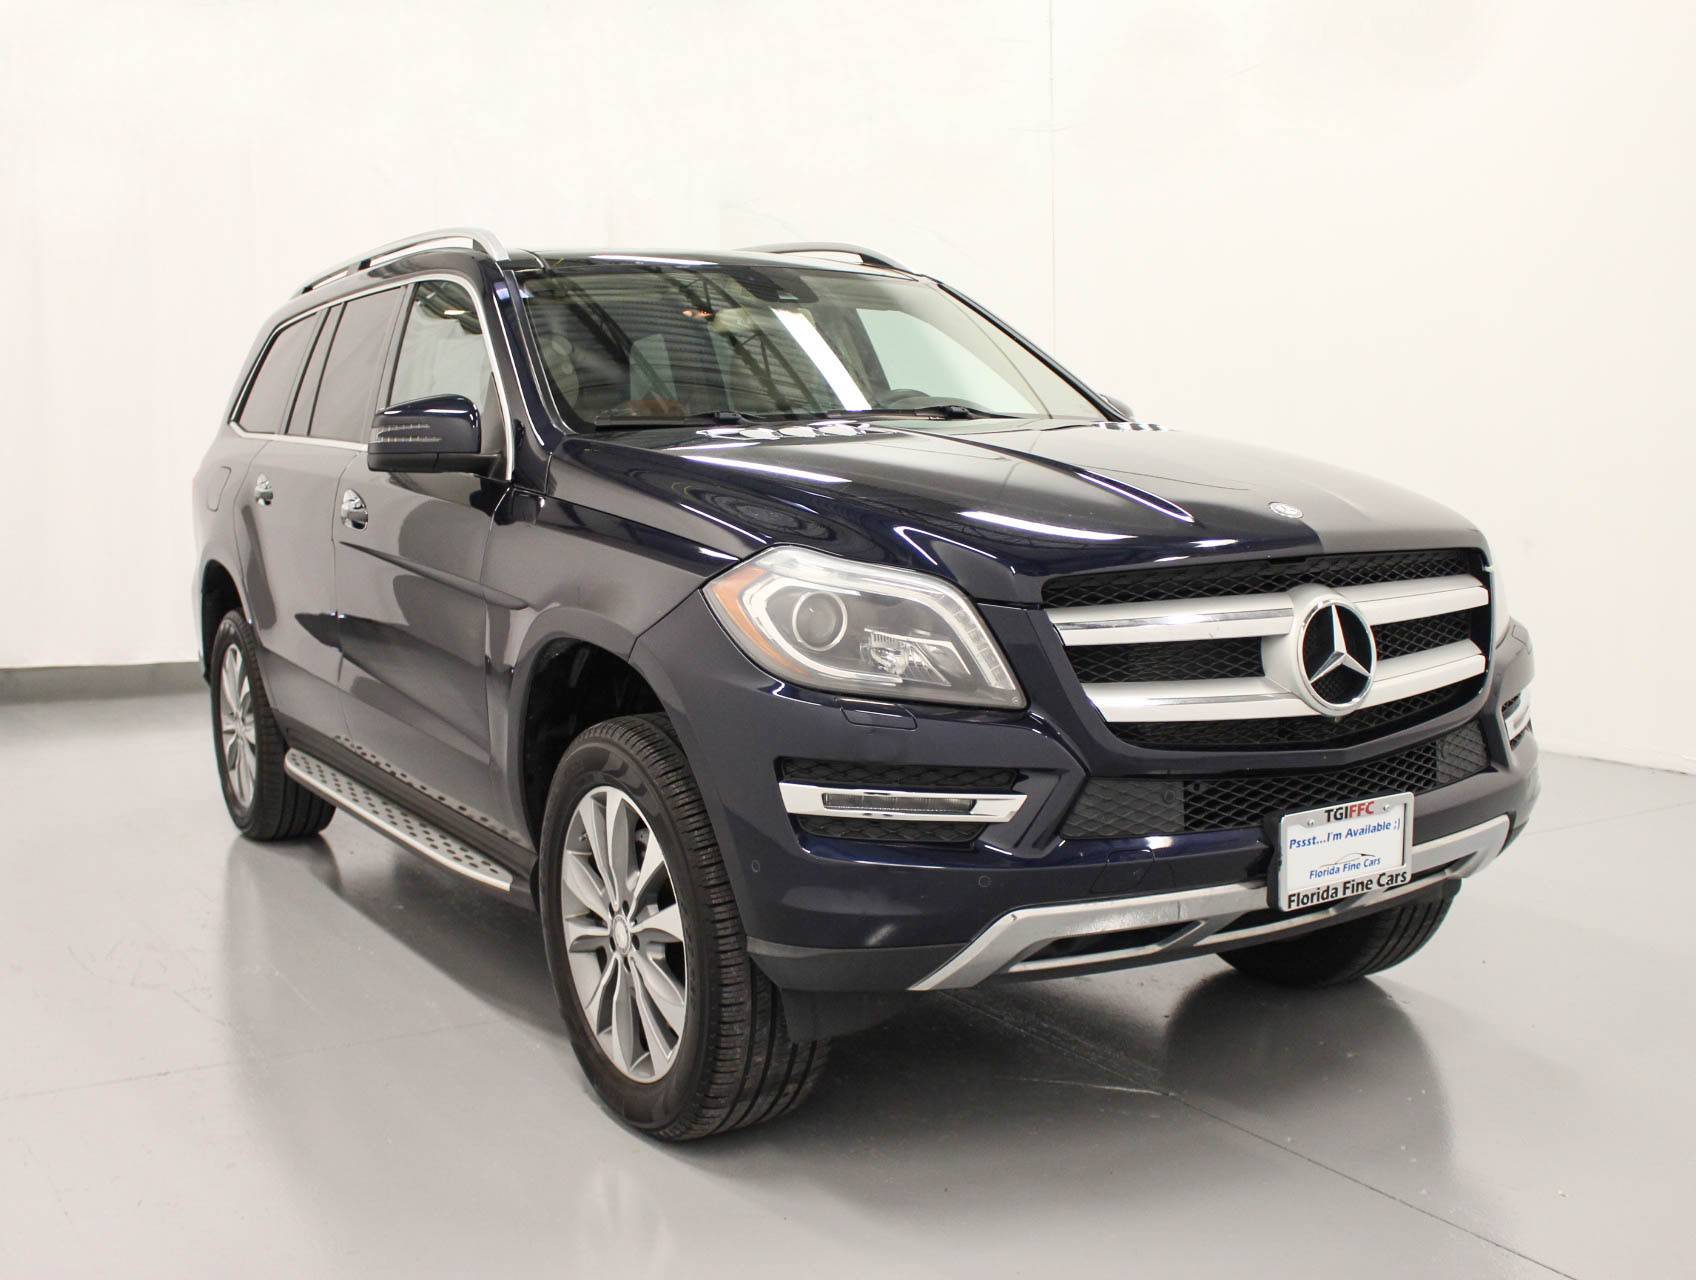 Florida Fine Cars - Used MERCEDES-BENZ GL CLASS 2014 HOLLYWOOD GL450 4MATIC